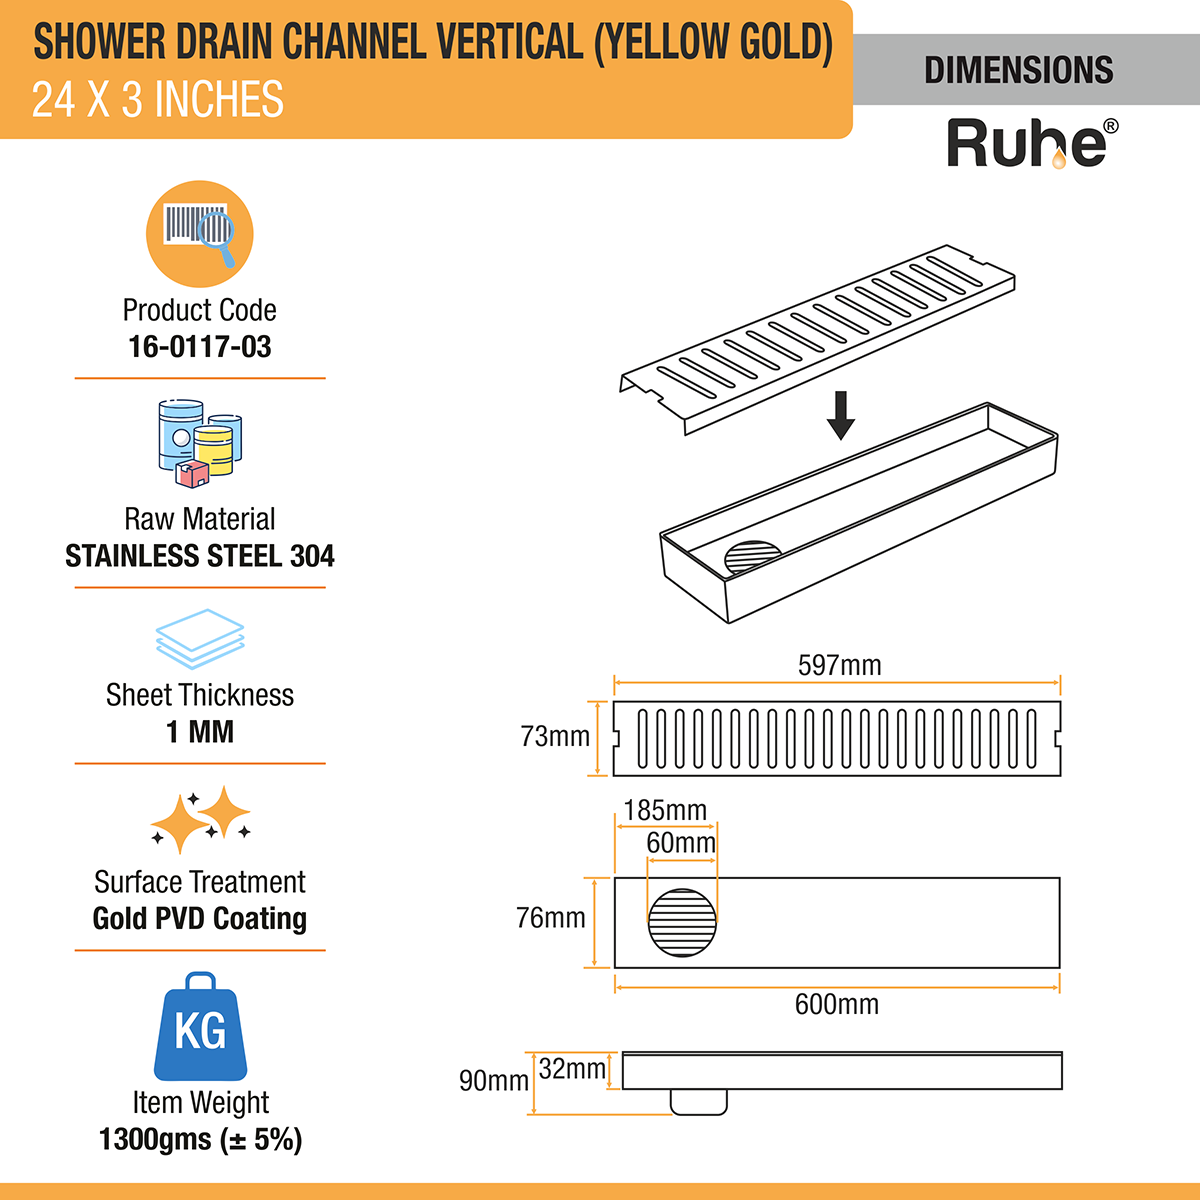 Vertical Shower Drain Channel (24 x 3 Inches) YELLOW GOLD dimensions and size